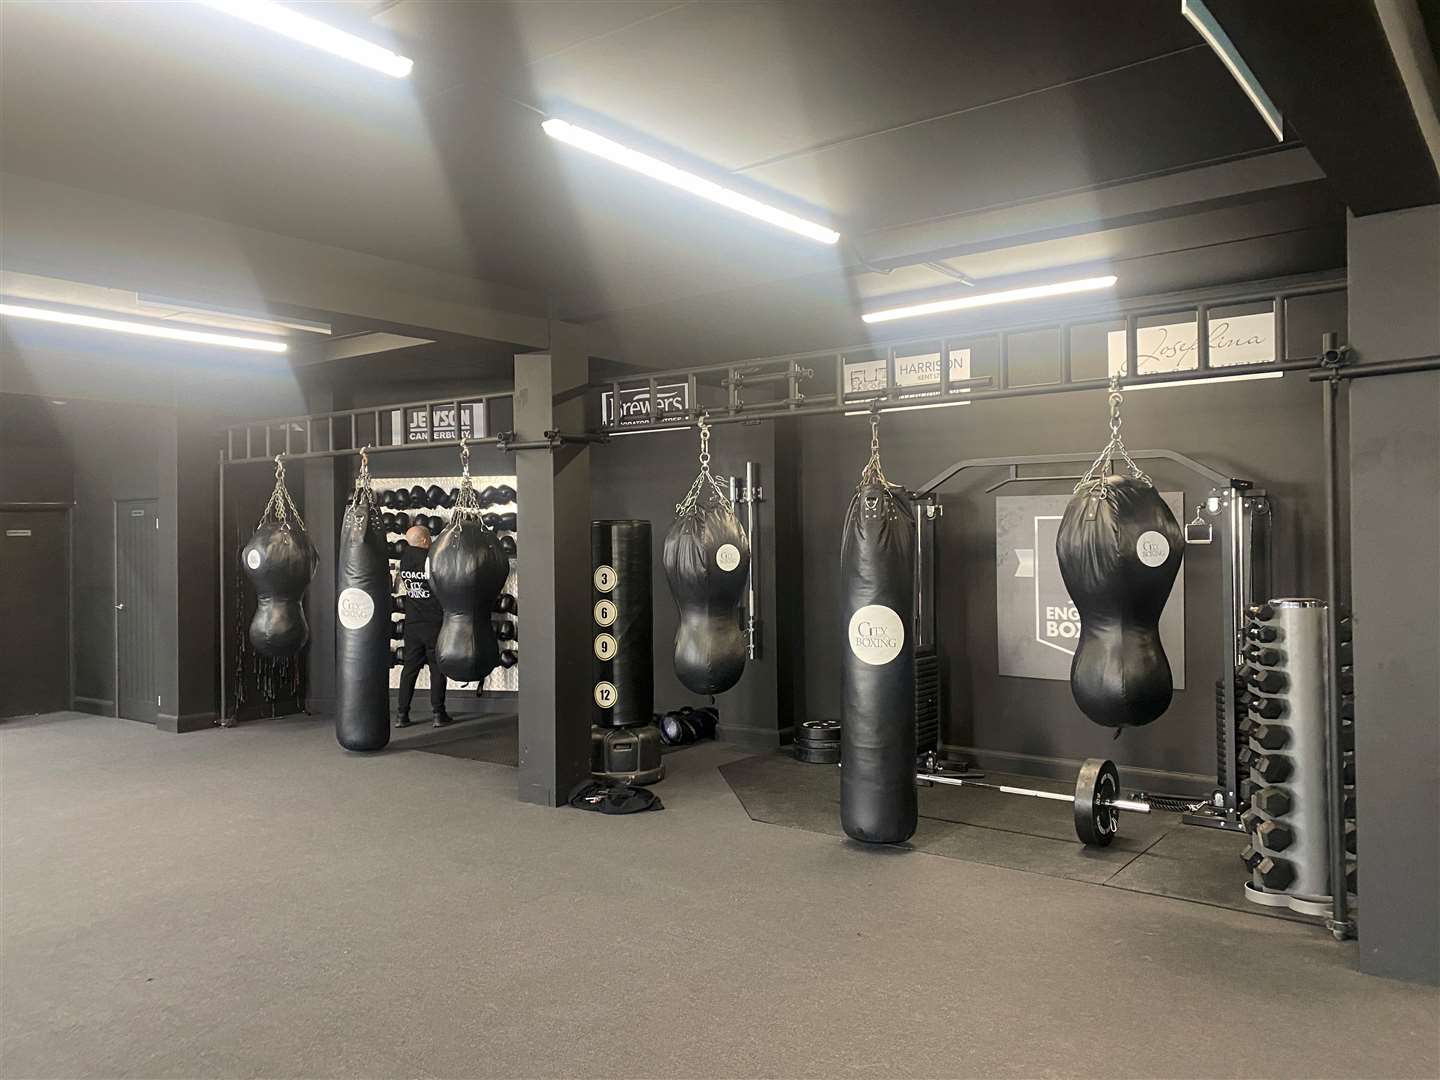 City Boxing in Canterbury has recently been refurbished with all new equipment